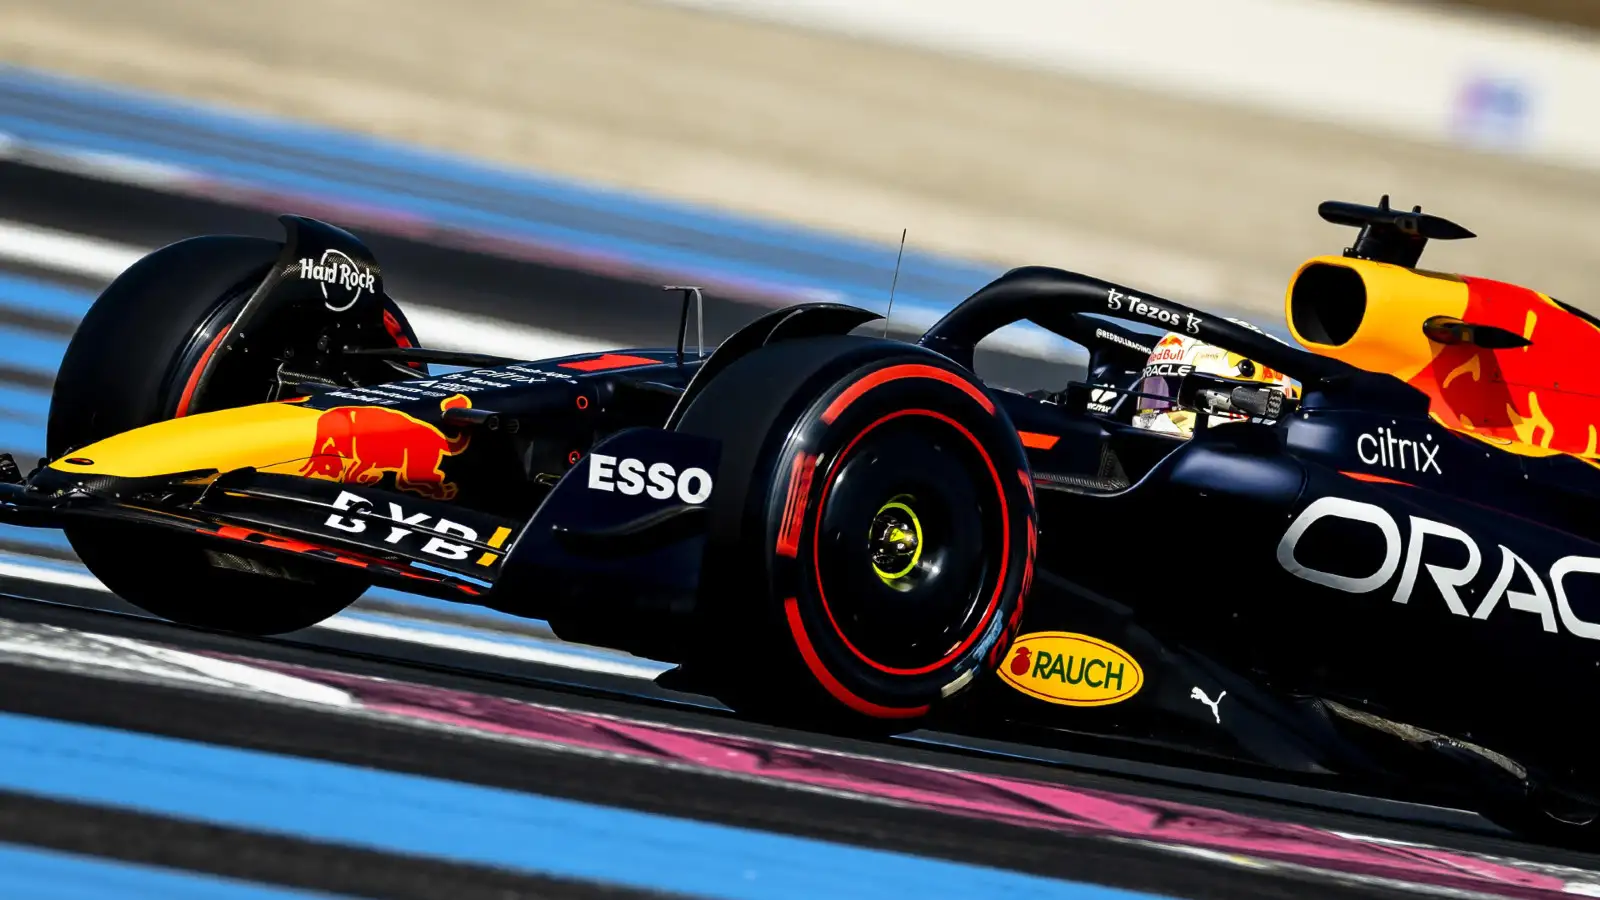 Red Bull driver Max Verstappen at the French Grand Prix. Paul Ricard, July 2022.